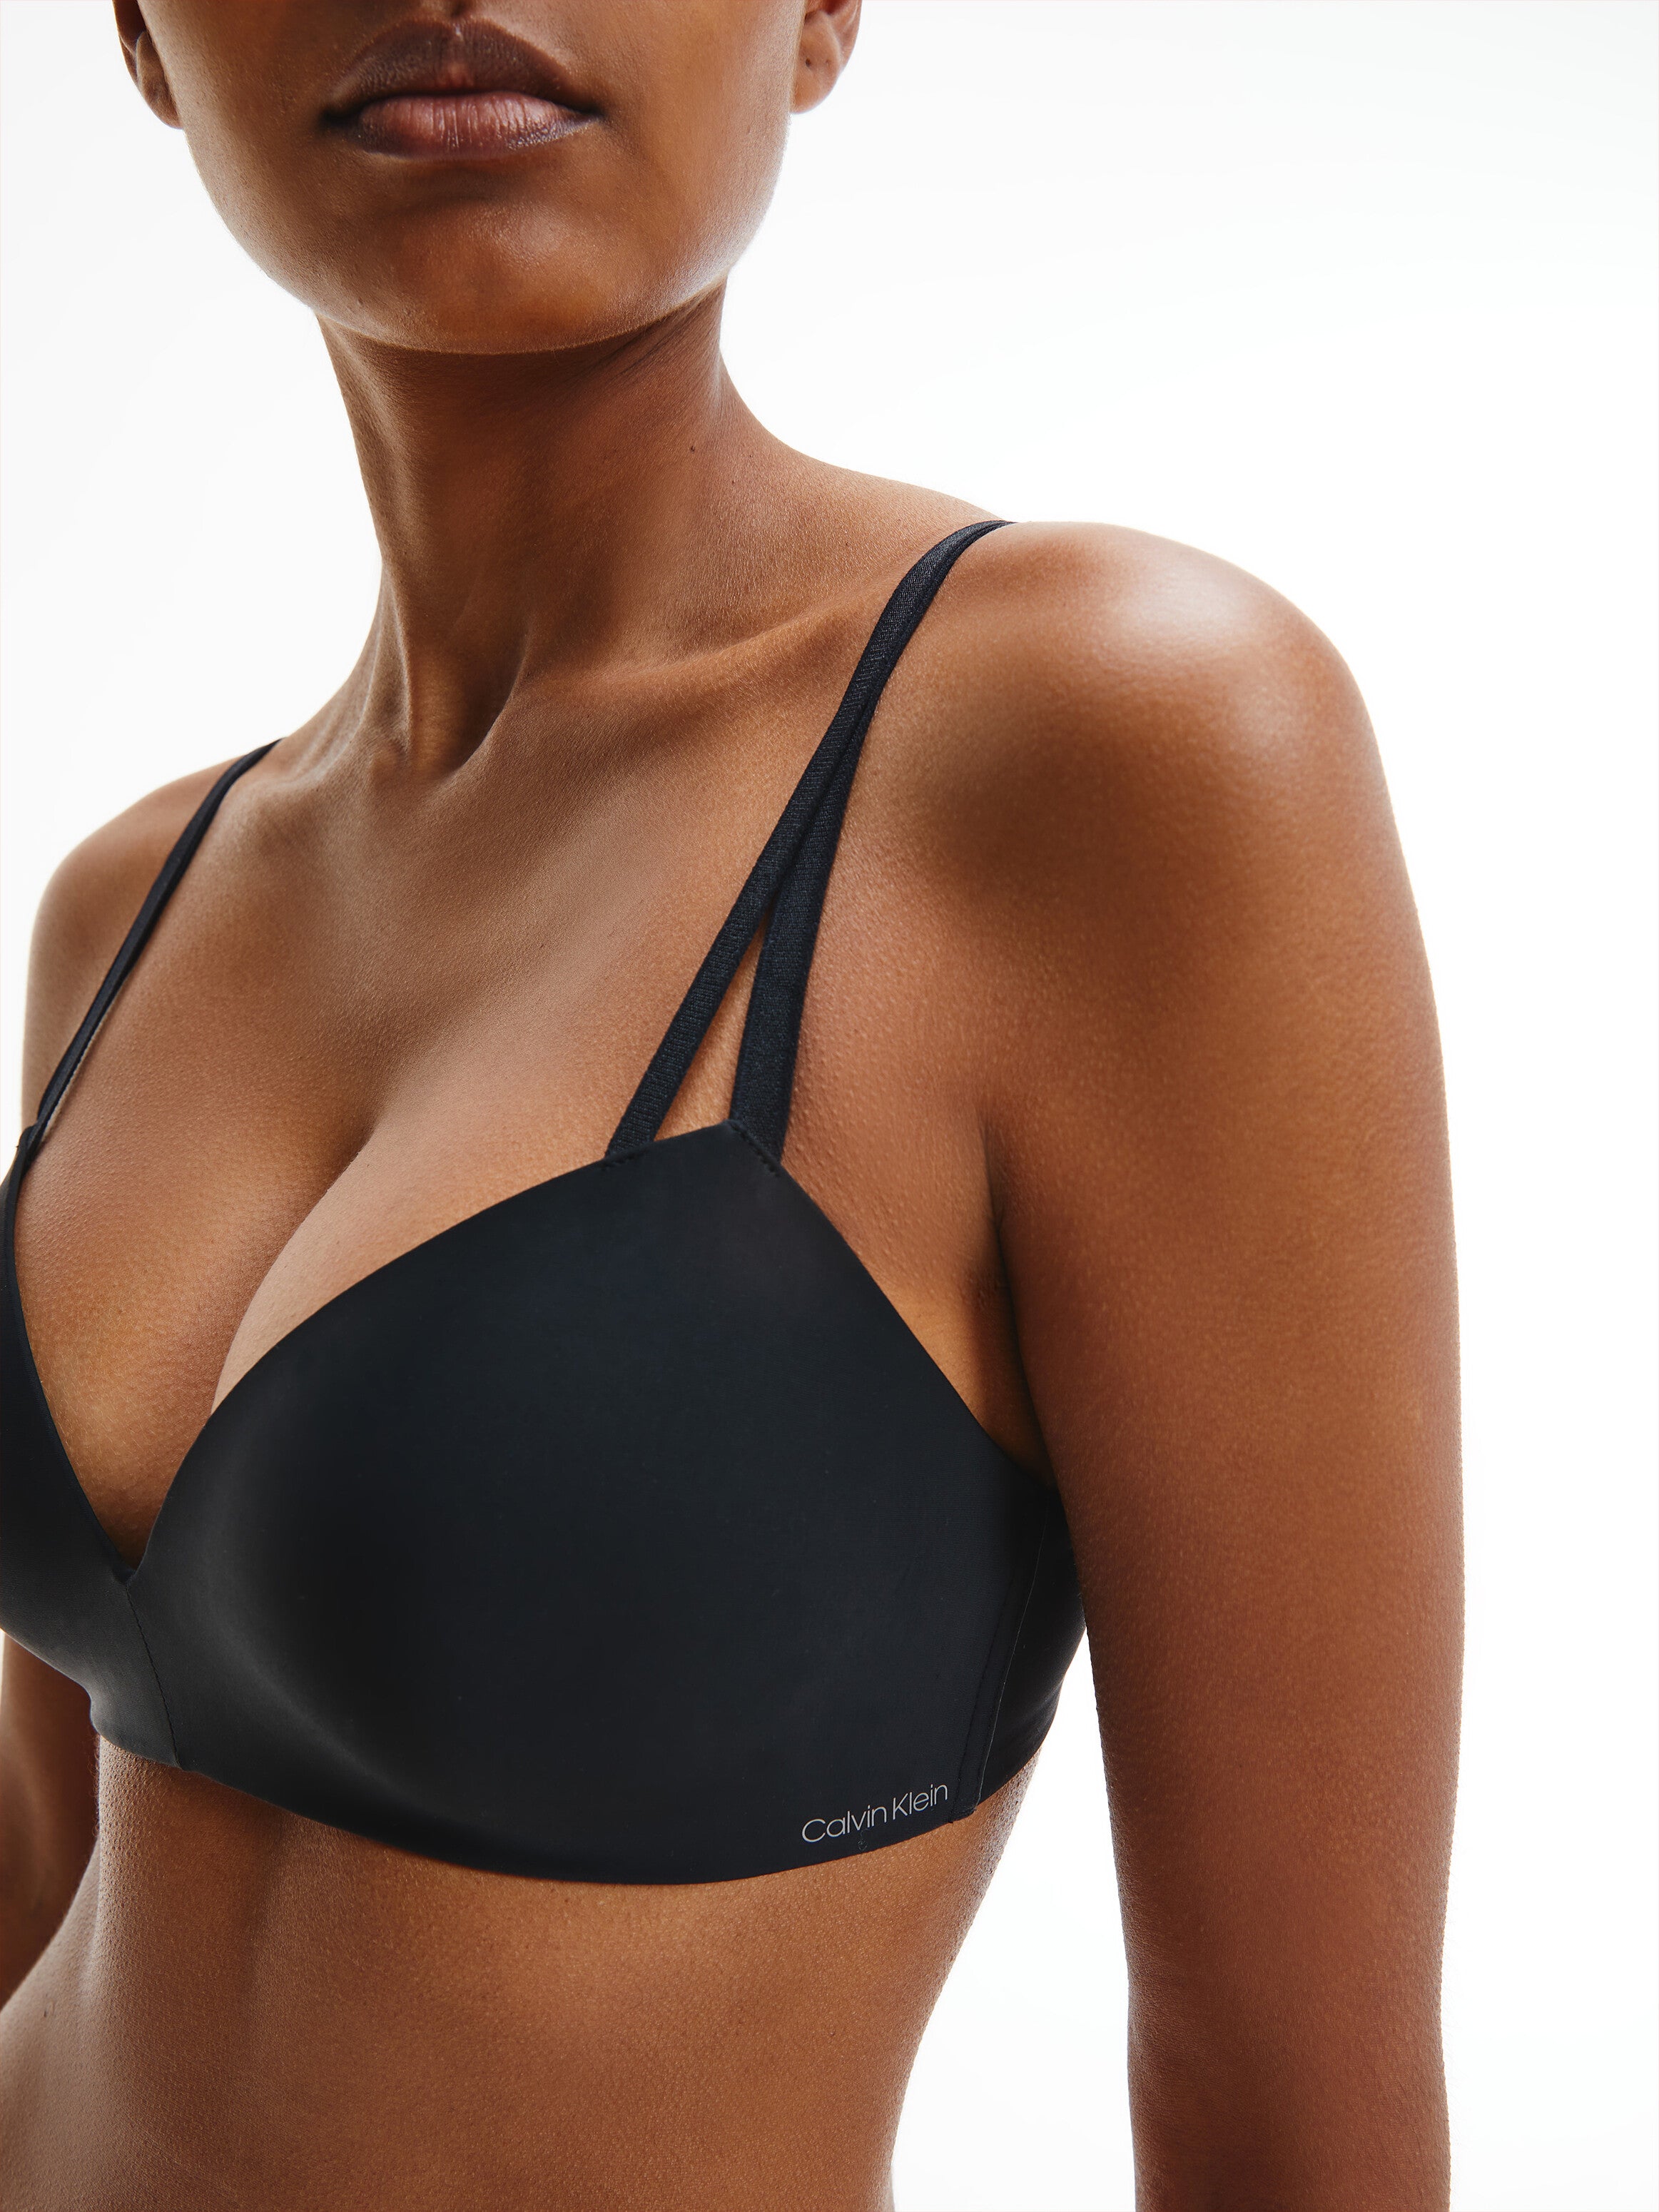 Take it from @dyllanmoxim — there's a Comfort Bliss bra for *everyone*